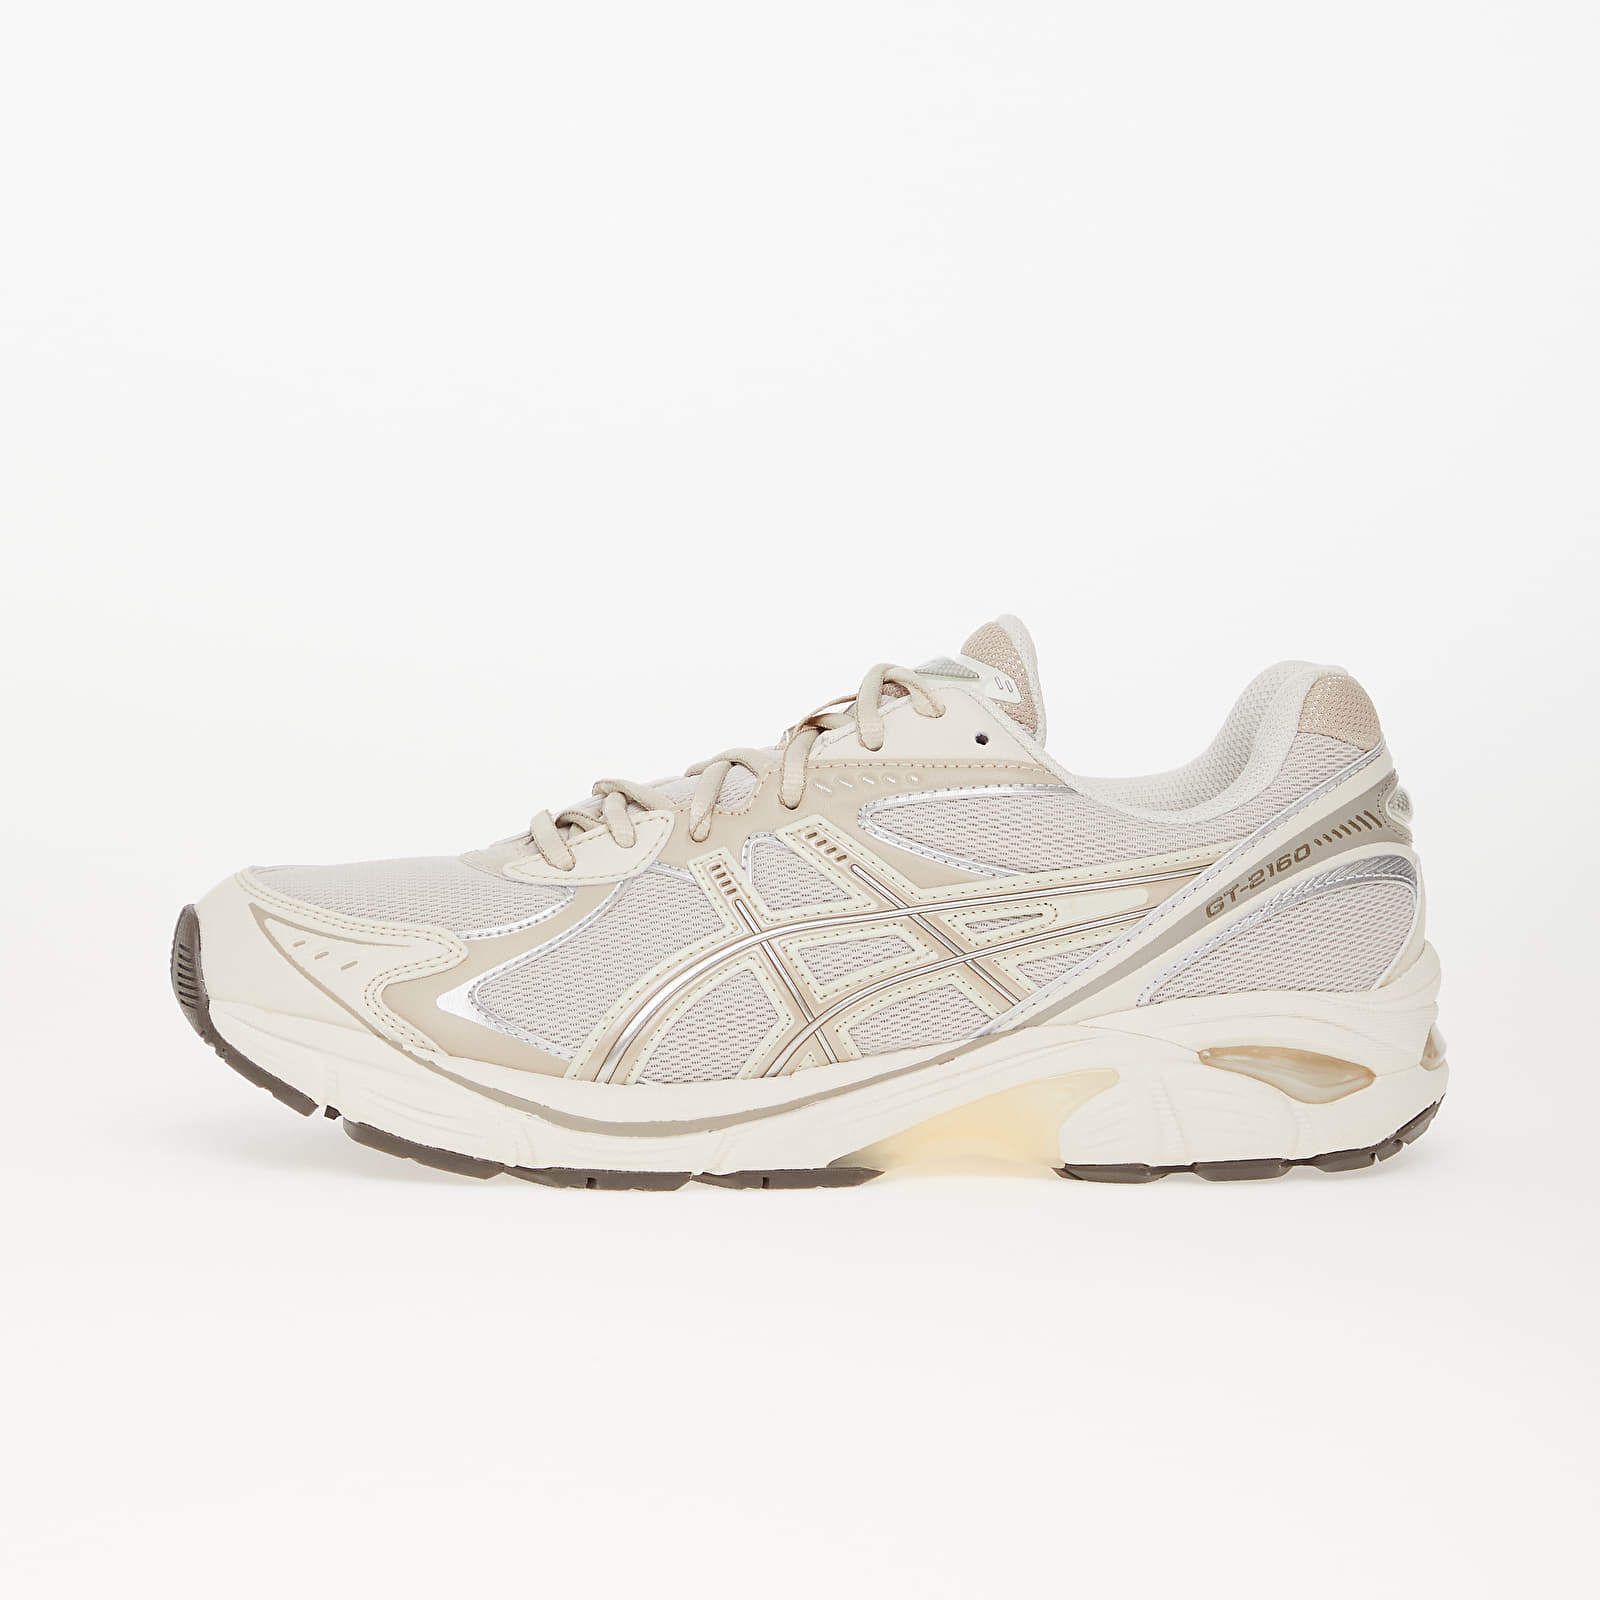 Asics - gt-2160 oatmeal/ simply taupe